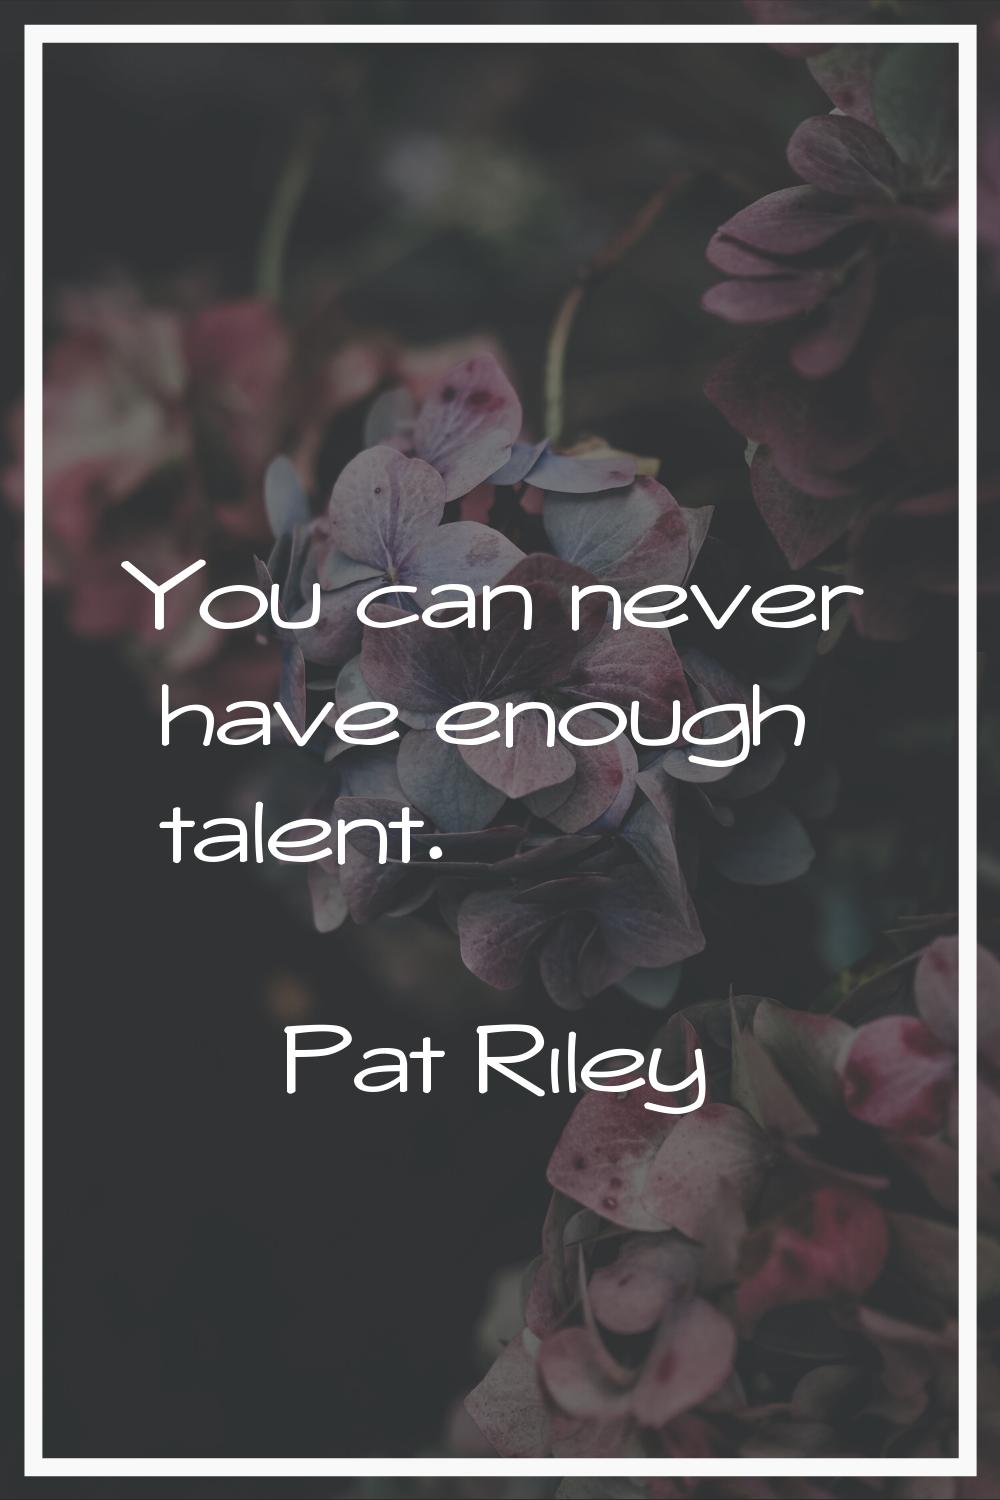 You can never have enough talent.